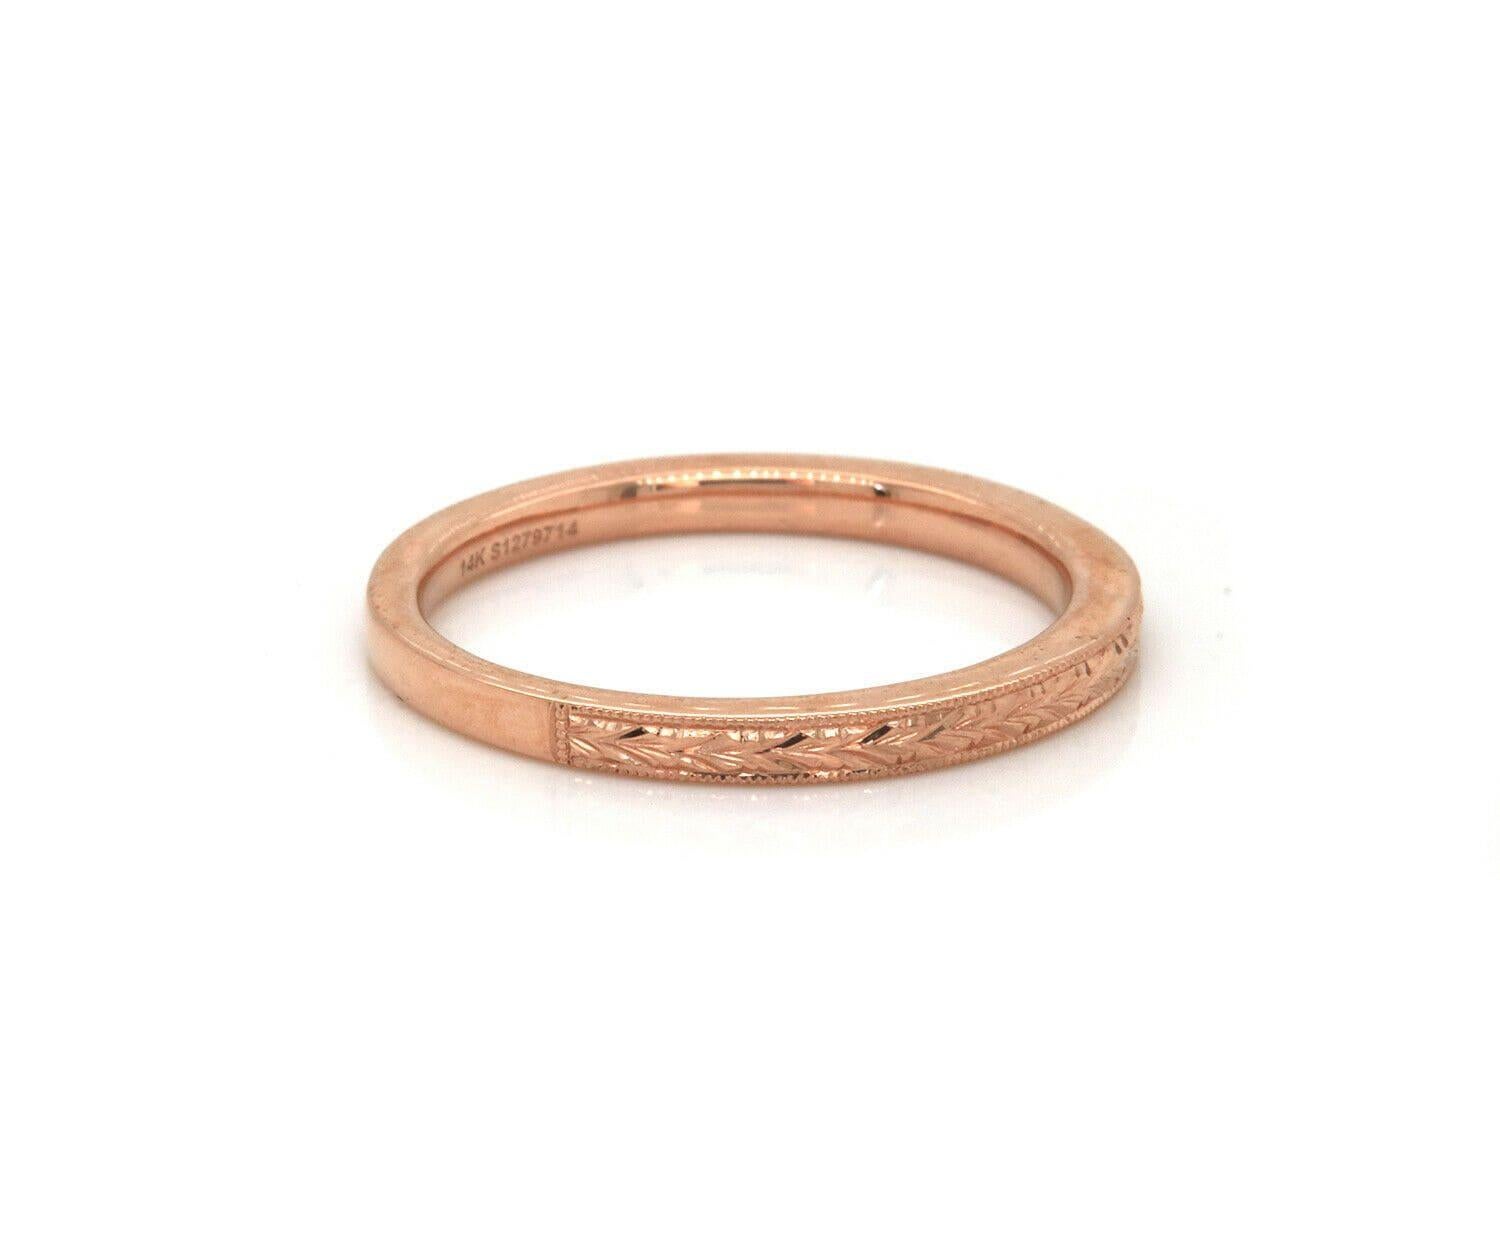 Women's New Gabriel & Co. Filigree Engraved Band Ring in 14K Rose Gold For Sale